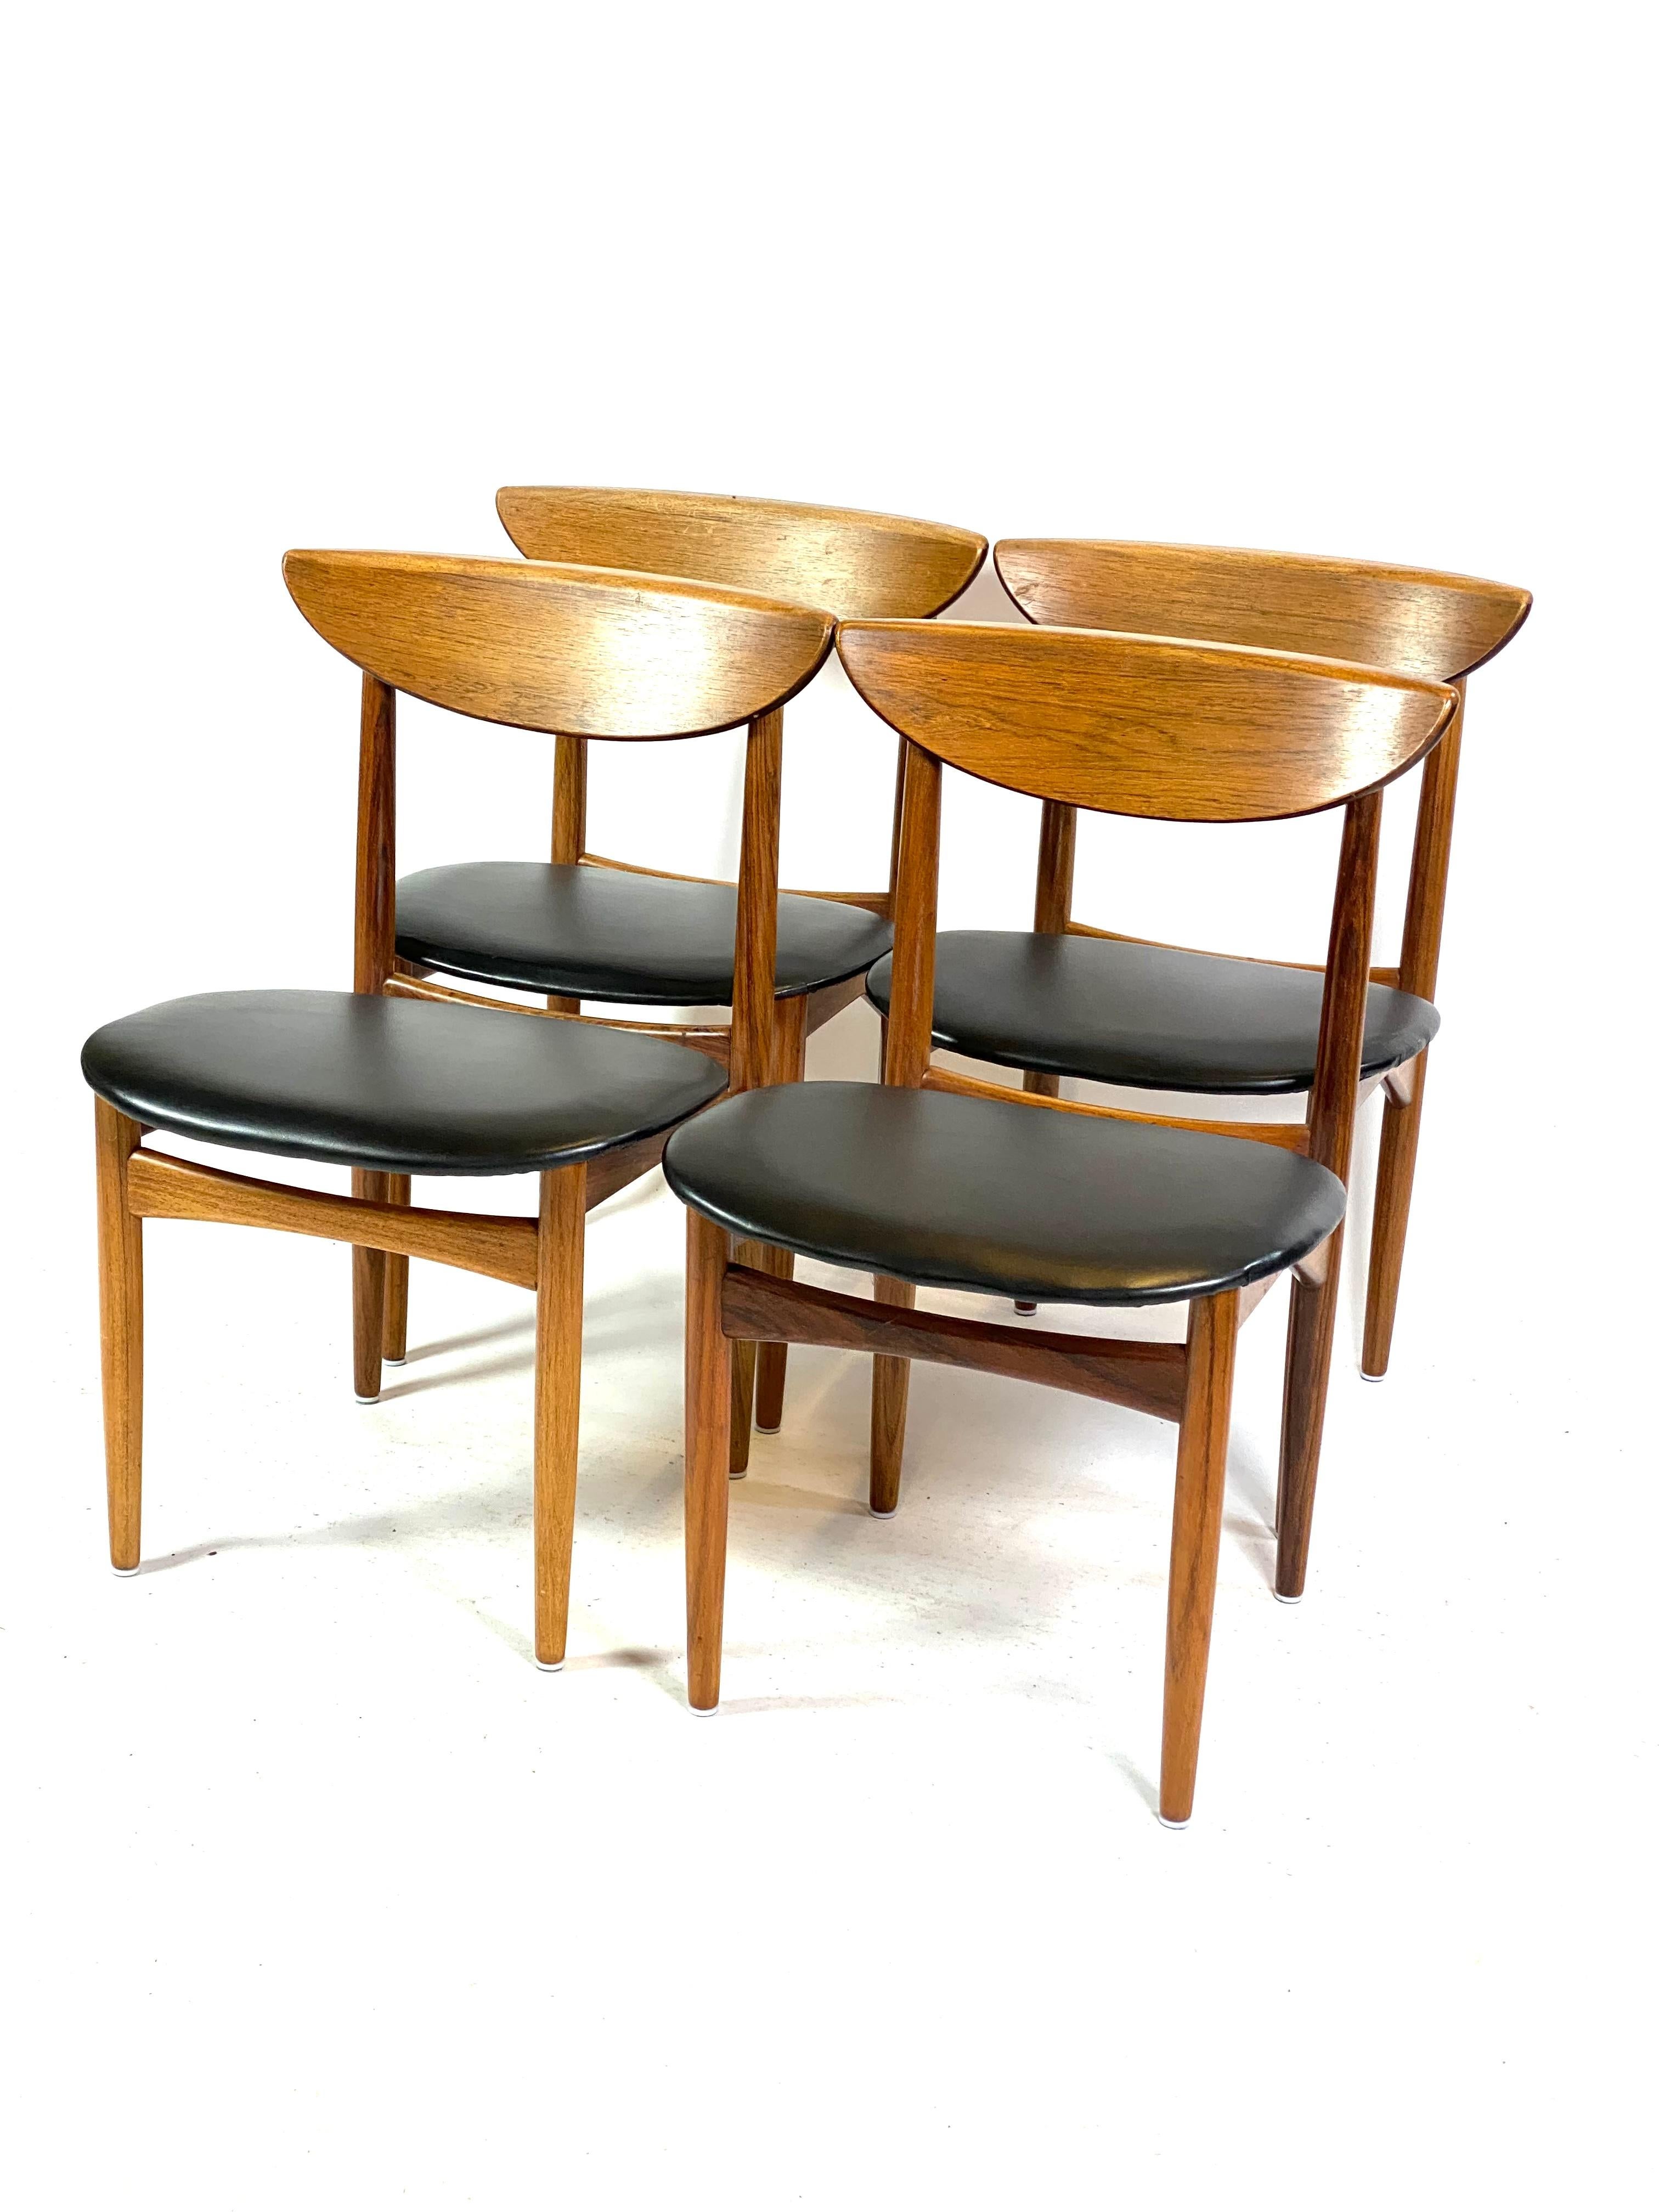 Four dining room chairs in rosewood and upholstered with black leather of Danish design from the 1960s. The chairs are in great vintage condition.

This product will be inspected thoroughly at our professional workshop by our educated employees, who